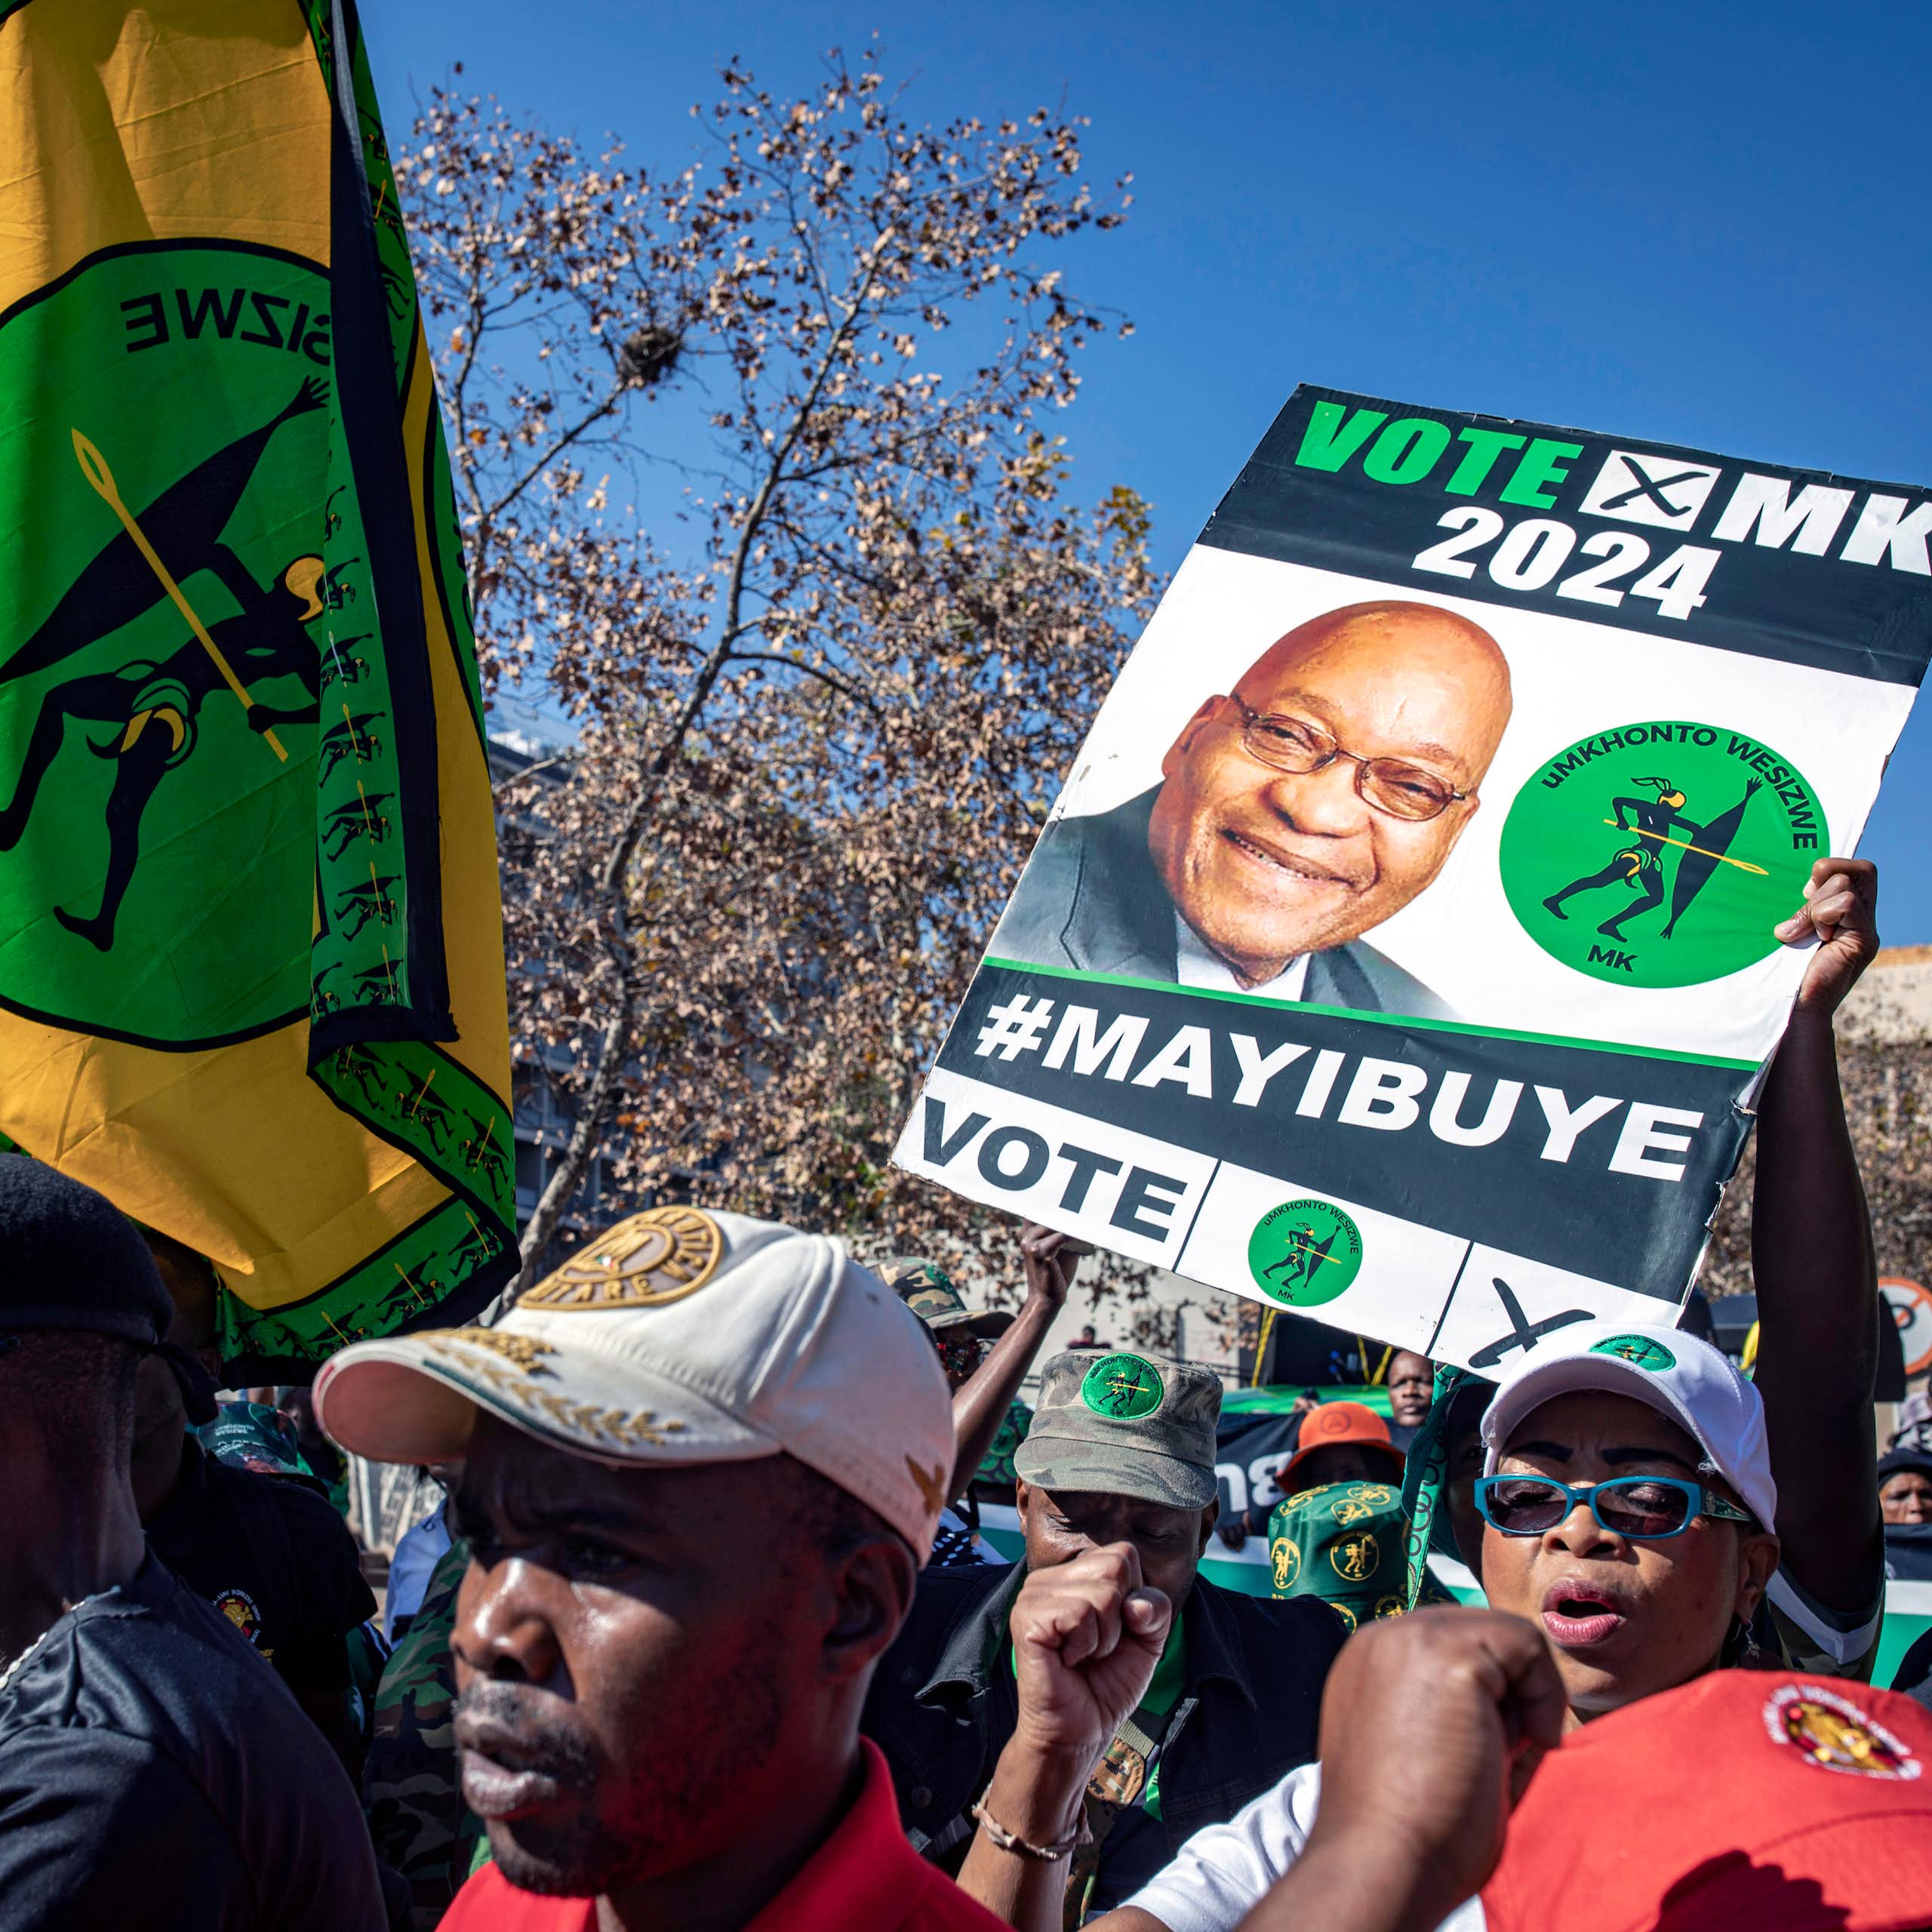 Mayibuye! The 100-year-old slogan that’s stirred up divisions in South Africa’s elections